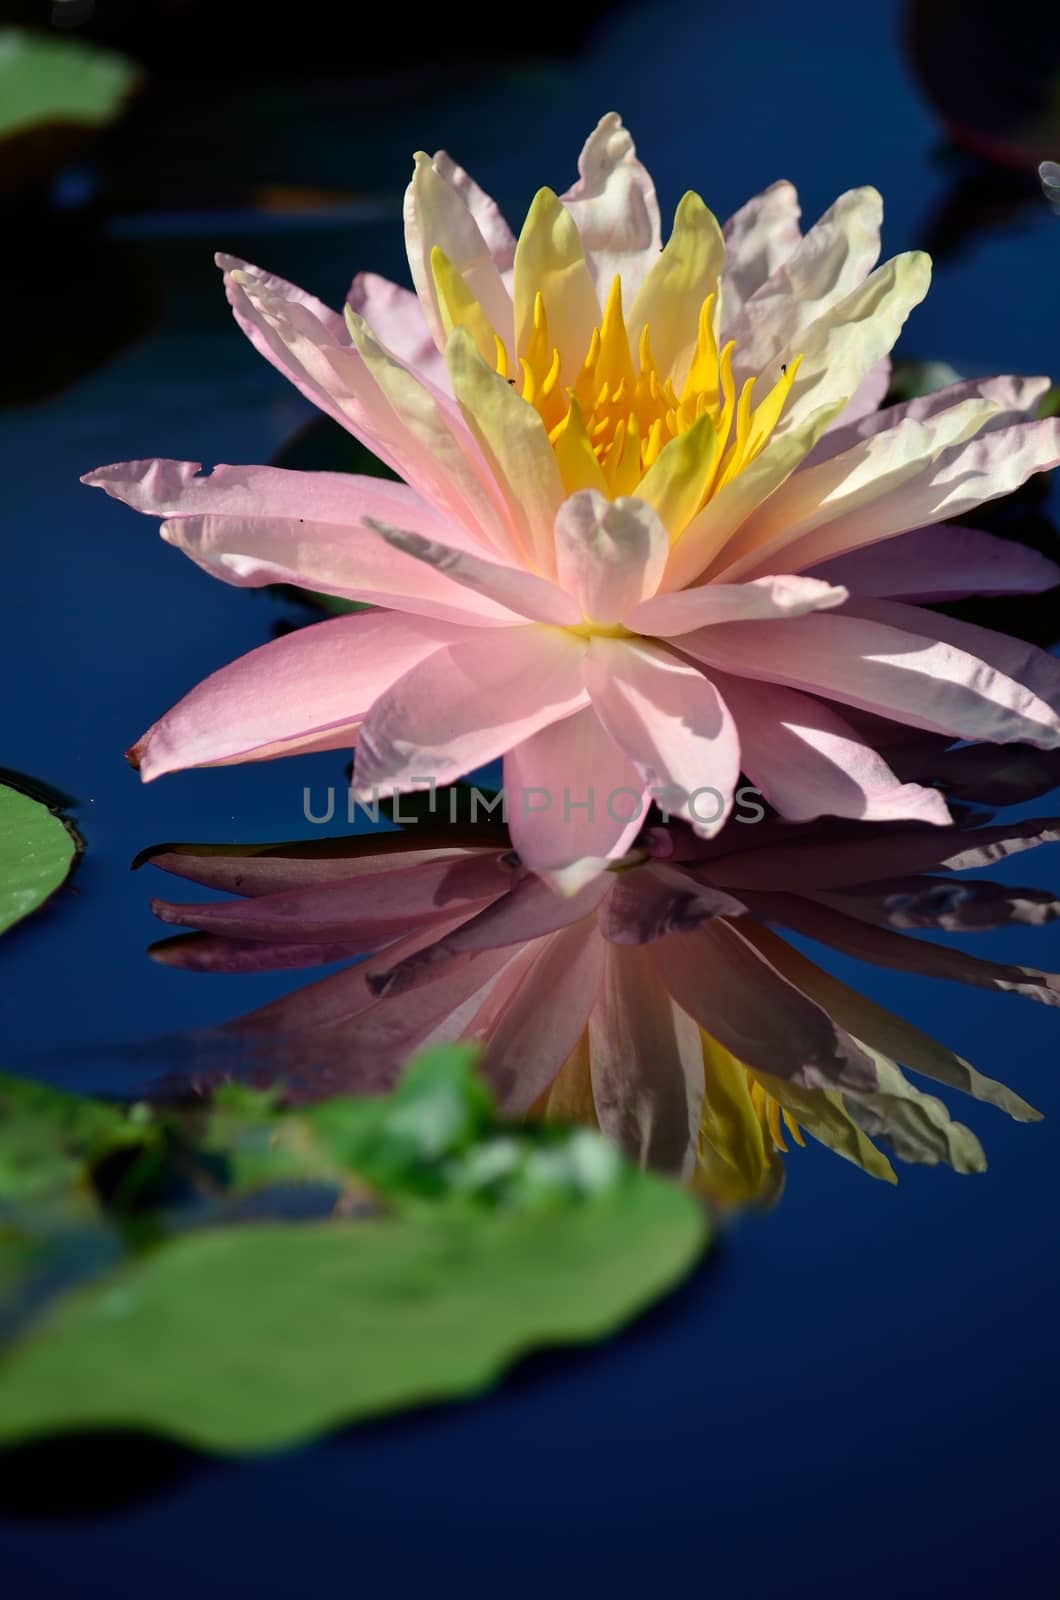 A fully opened pink water lily reflects near a lily pad on the pond